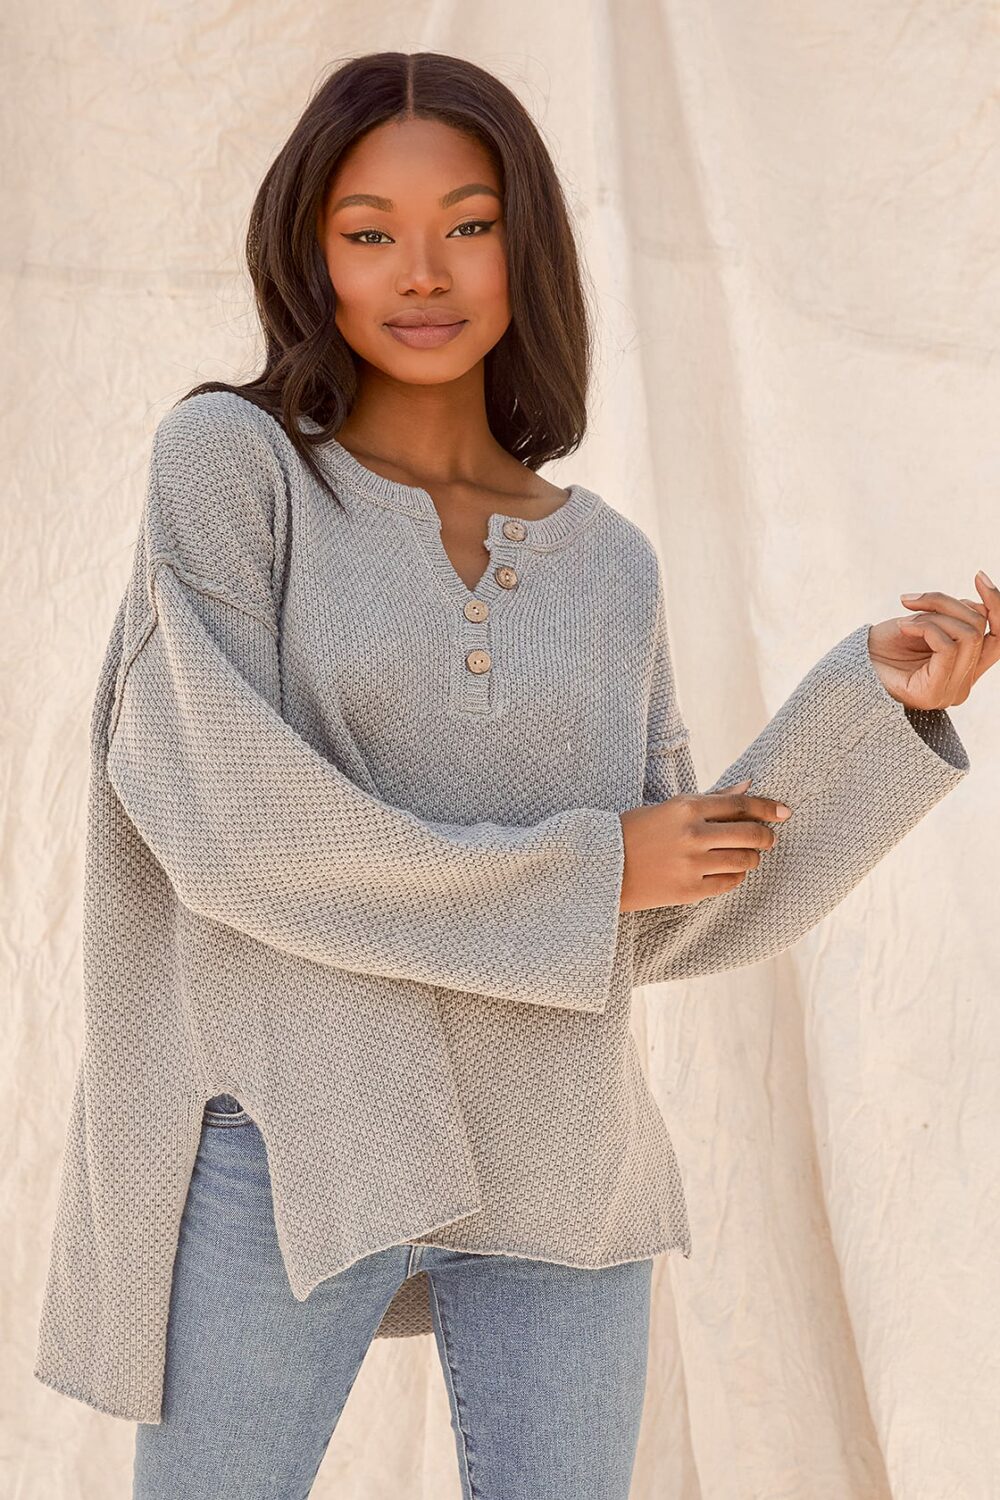 This fall cuddle up in a comforting Grey Knit Oversized Sweater. This cozy knit has a round neck long sleeves and dropped shoulders and is made from a cotton blend.